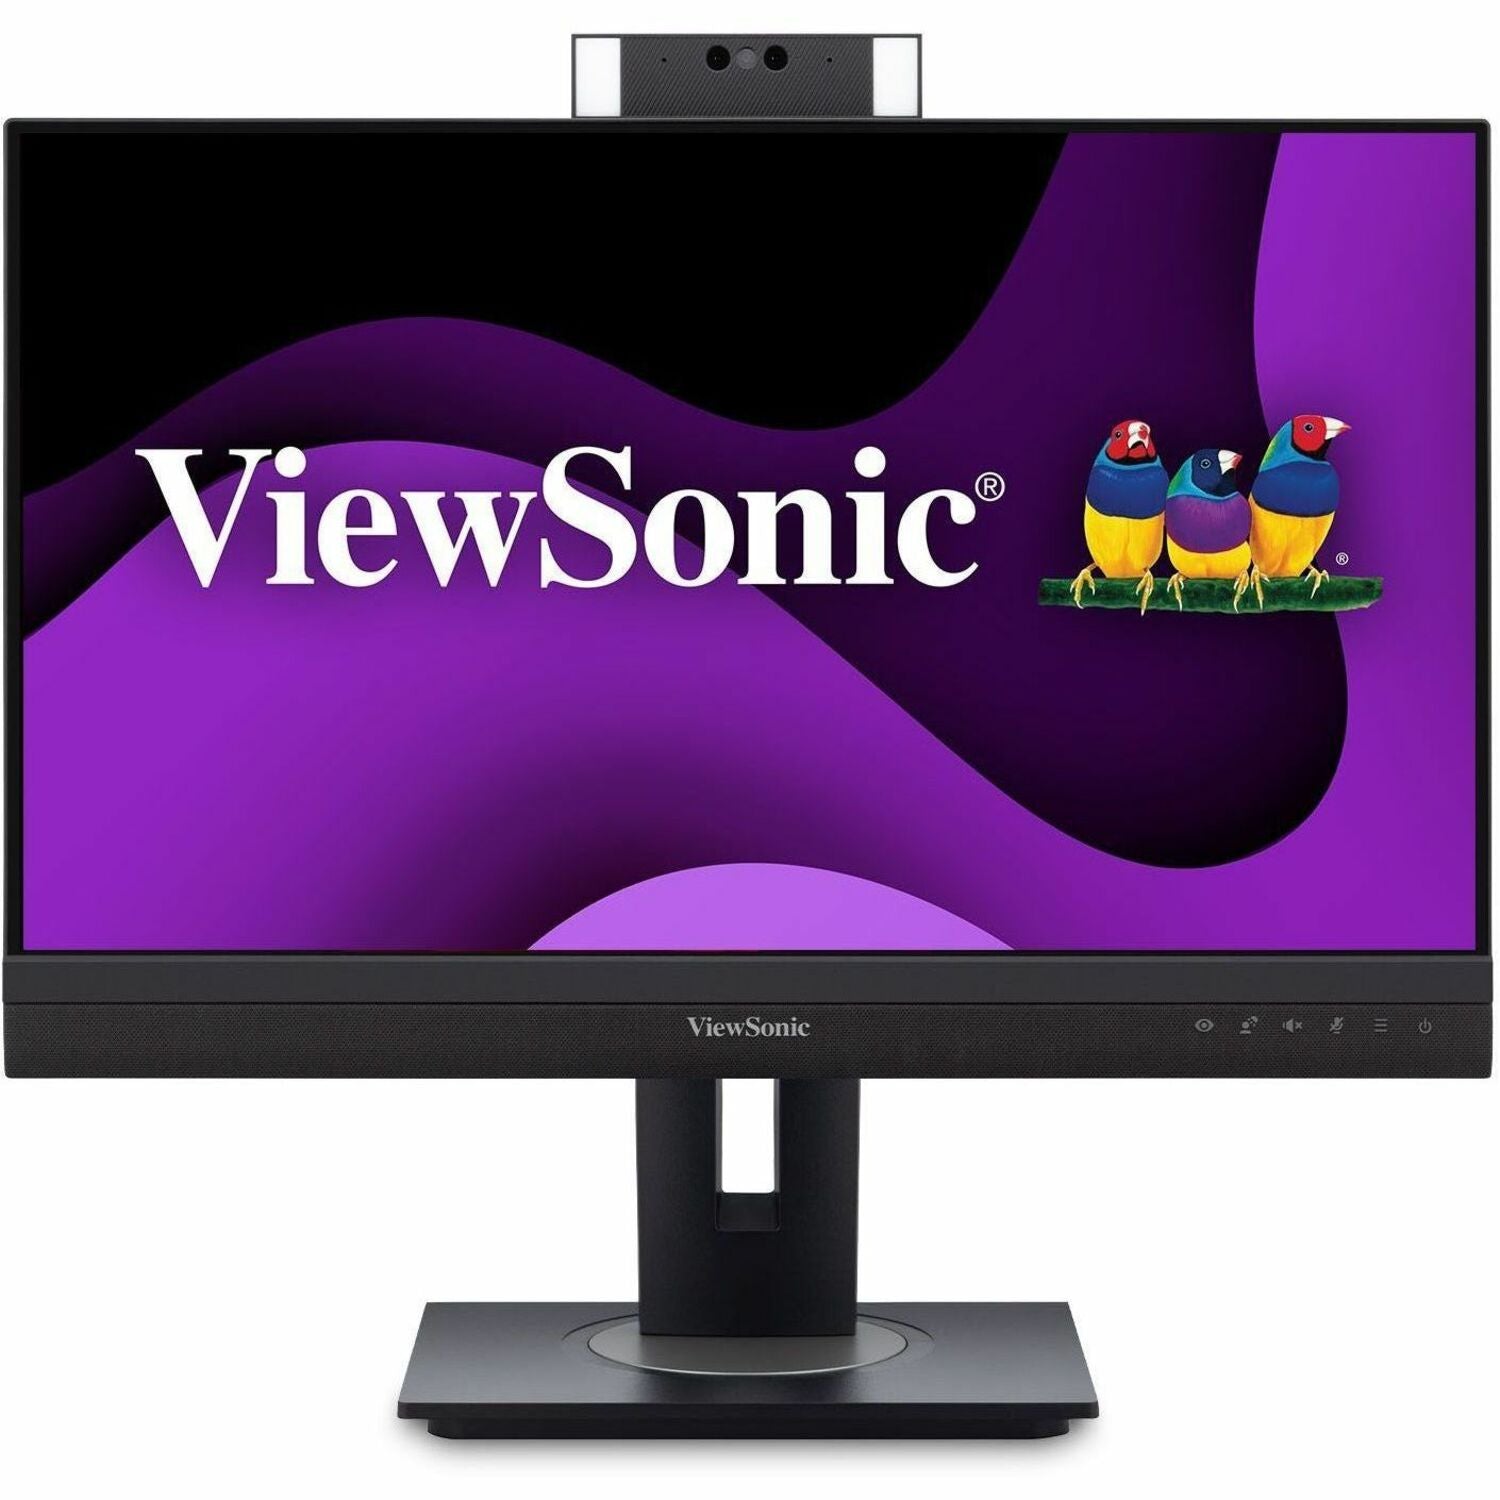 ViewSonic VG2457V 24 Inch 1080p Video Conference Docking Monitor with Windows Hello Compatible IR Webcam, Advanced Ergonomics, and 90W USB C for Home and Office - VG2457V